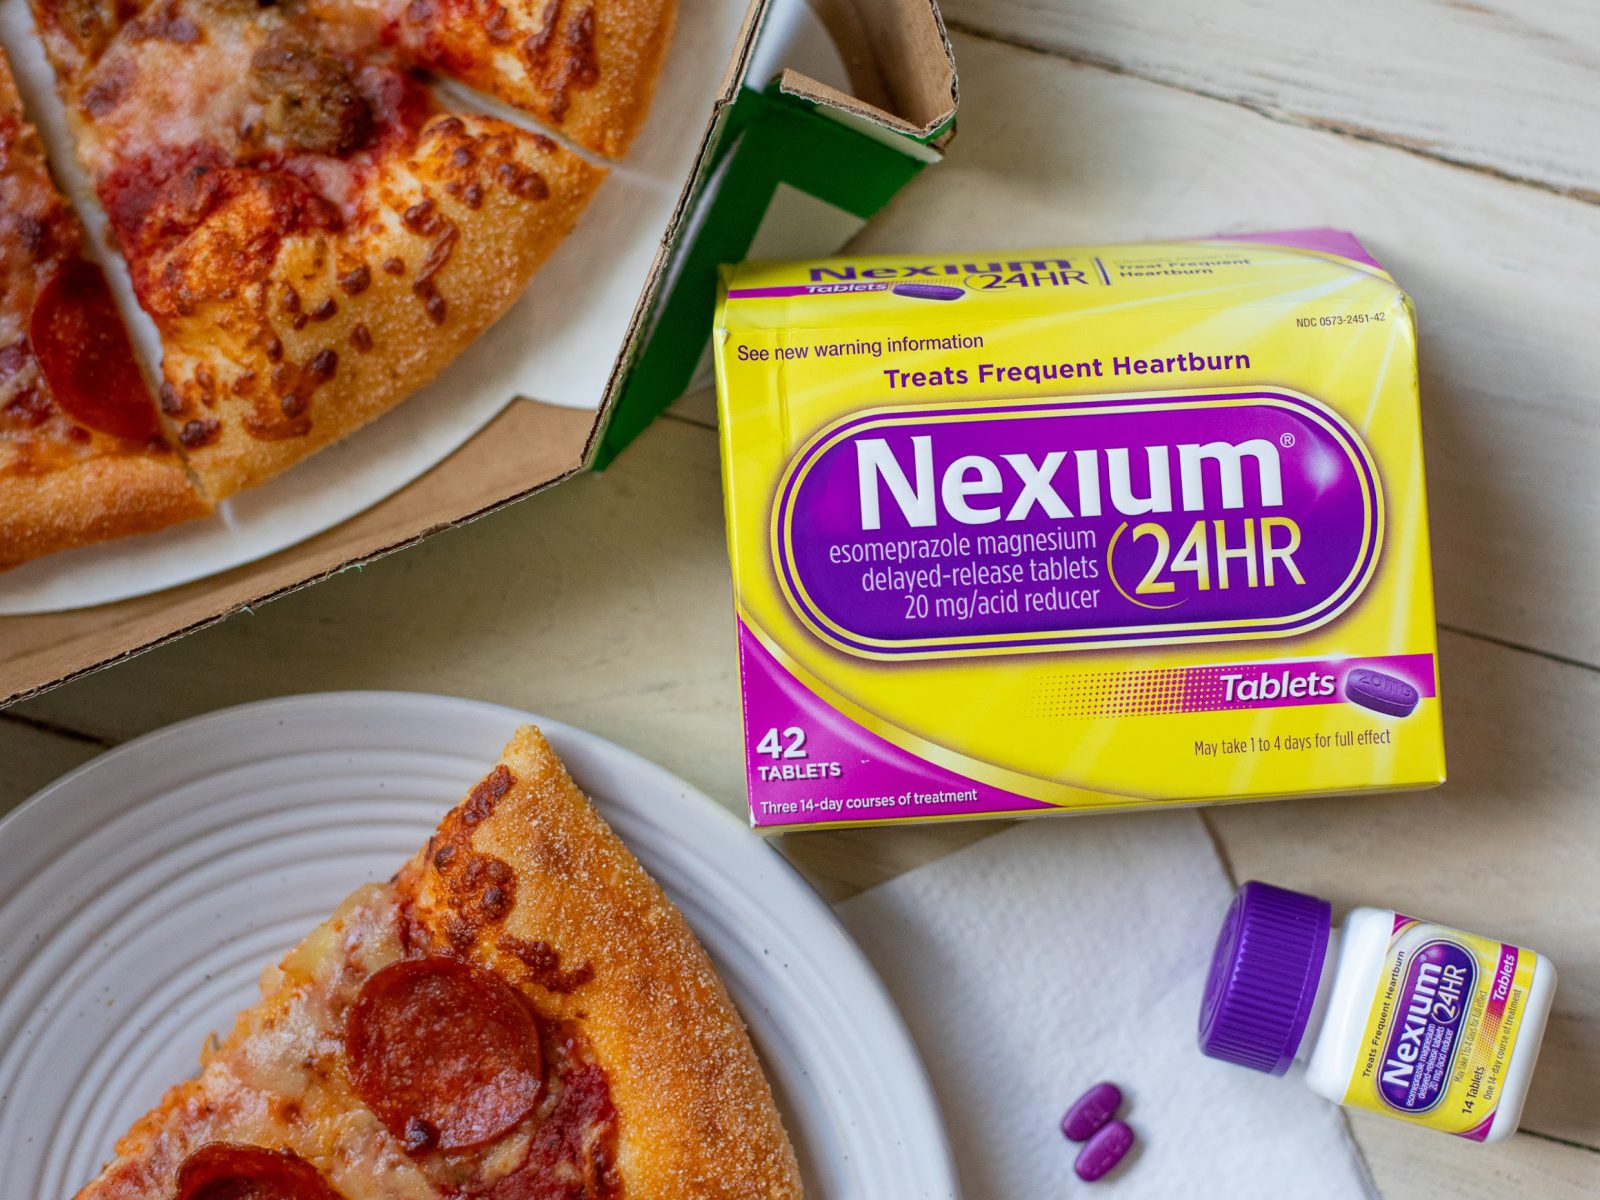 New Nexium Coupon For The Publix Sale – 42 Count Box Only $18.99 (Save $10)